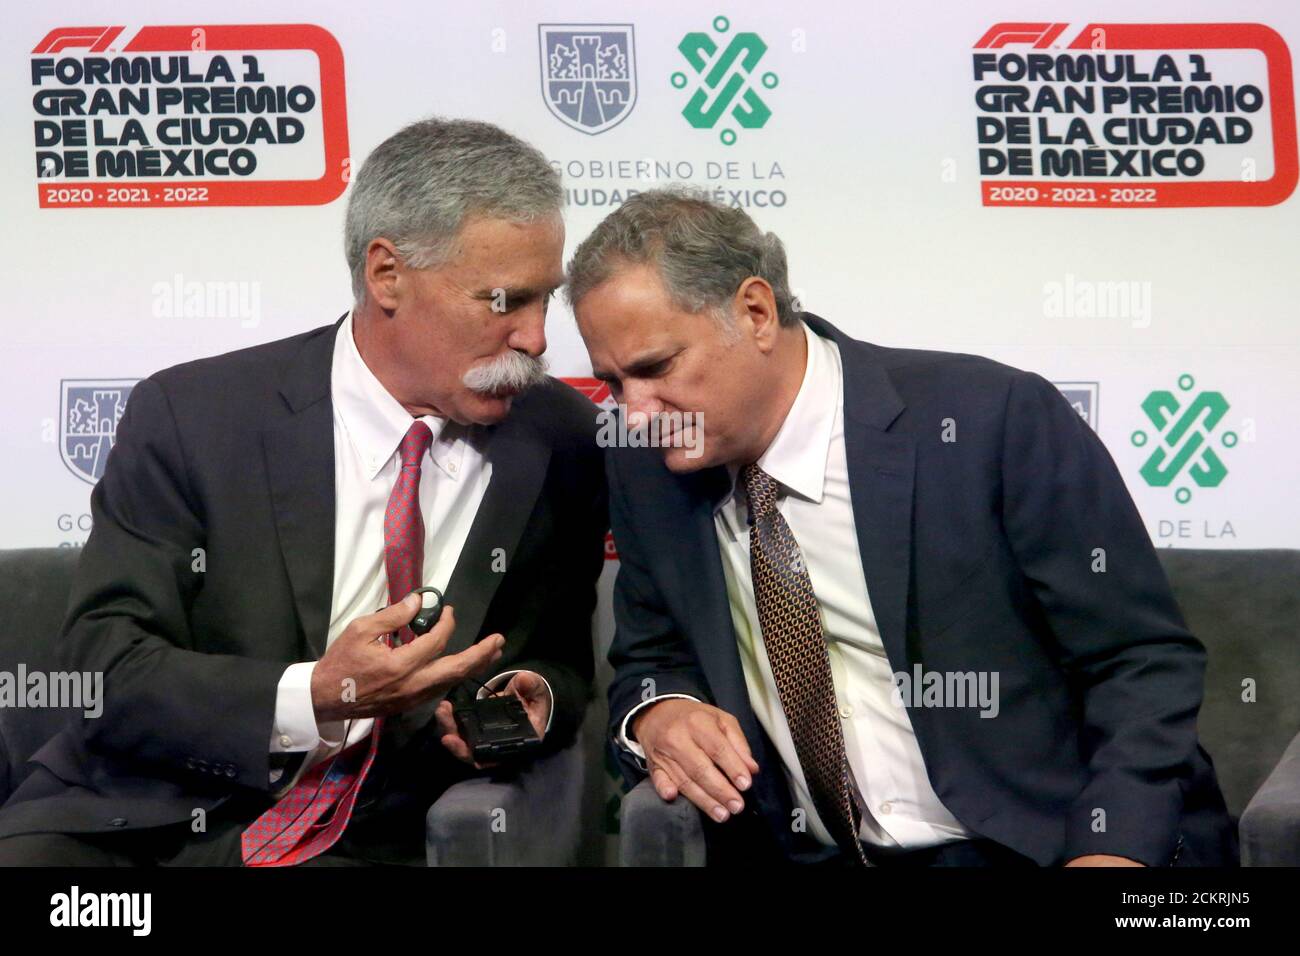 Chase Carey (L), Formula One group CEO, speaks with Alejandro Soberon, Chief Executive Officer and Managing Director of Corporacion Interamericana de Entretenimiento (CIE), during an official ceremony in Mexico City, Mexico August 8, 2019. REUTERS/Edgard Garrido Stock Photo